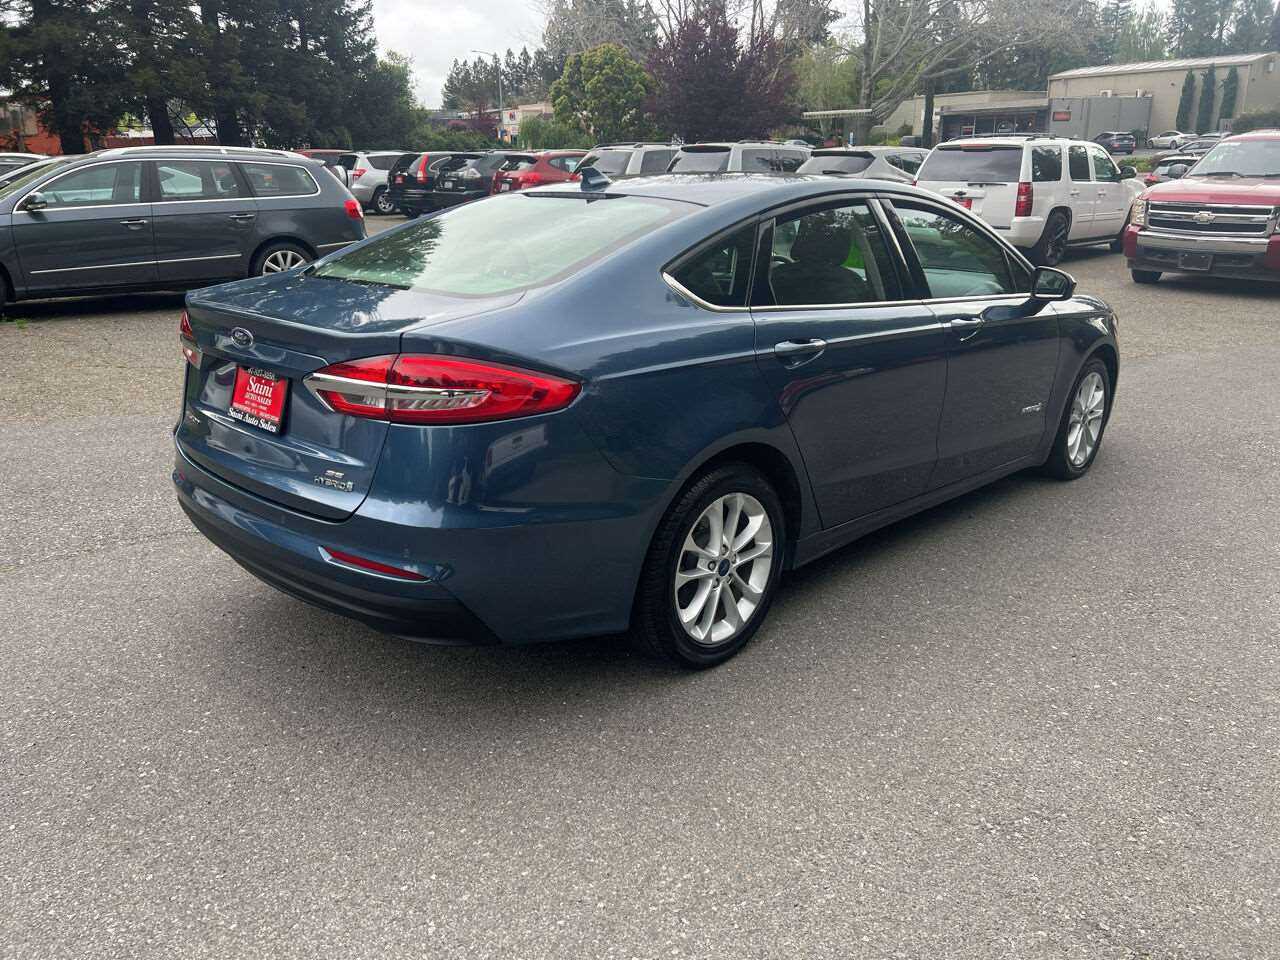 Ford Fusion Hybrid Image 3